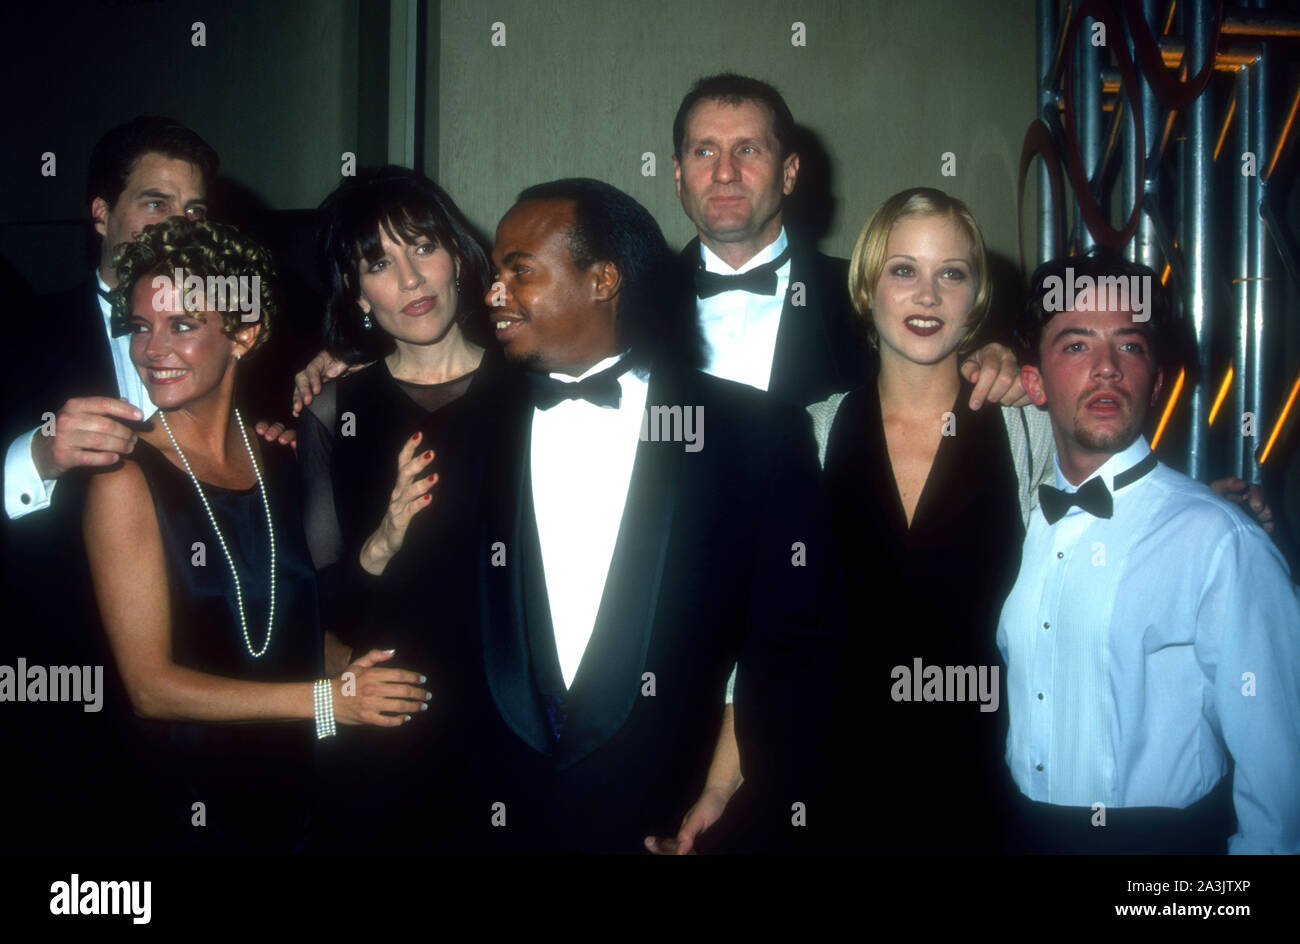 Los Angeles, California, USA 28th January 1995 (L-R) Actor Ted McGinley, actress Amanda Bearse, actress Katey Sagal, producer Michael G. Moye, actor Ed O'Neill, actress Christina Applegate and actor David Faustino attend Married With Children 200th Episode Event on January 28, 1995 in Los Angeles, California, USA. Photo by Barry King/Alamy Stock Photo Stock Photo